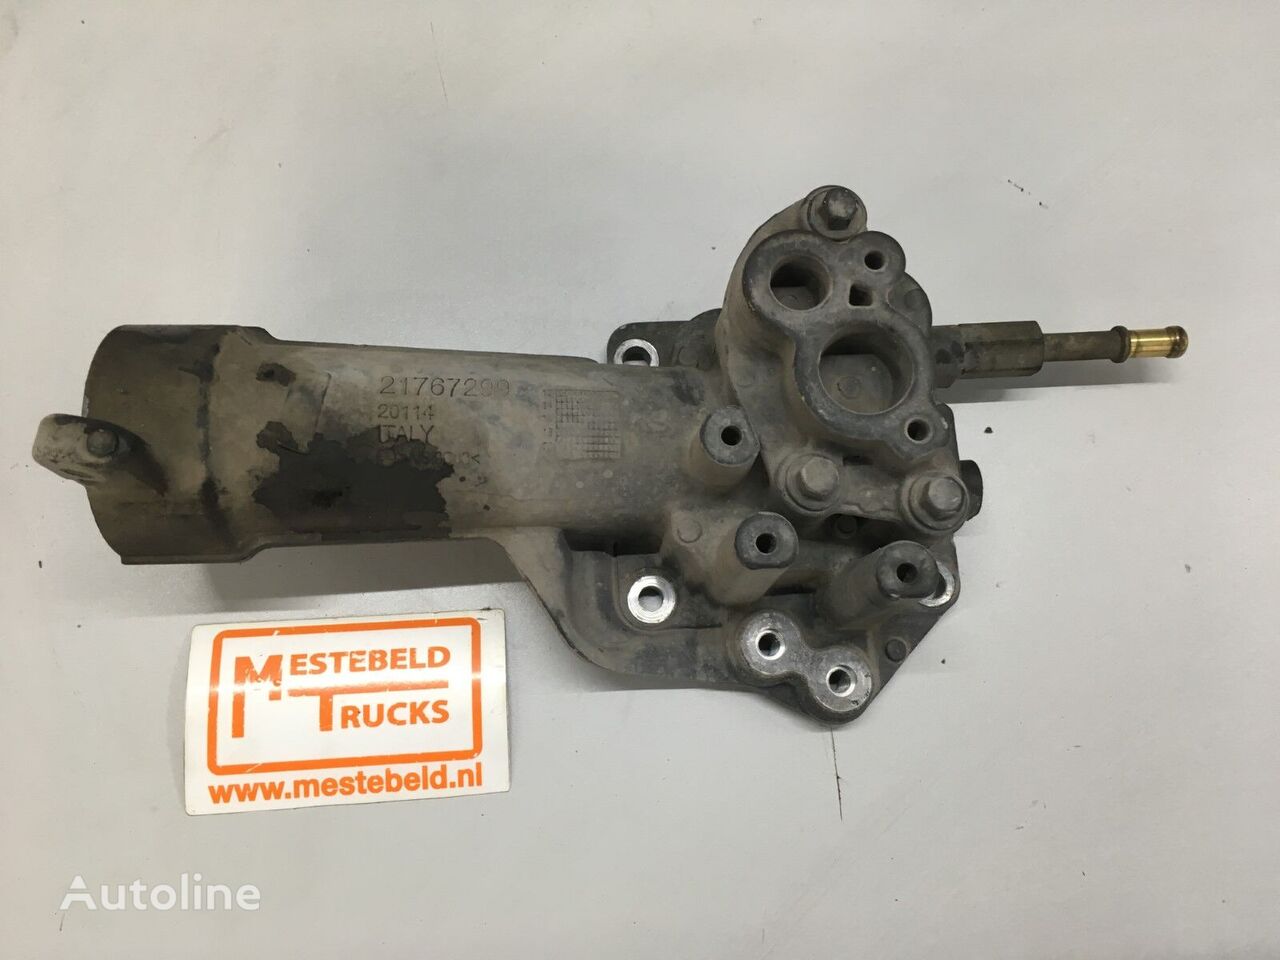 termostat Renault VERBINDINGSPIJP tbv THERMOSTAAT za tovornjak Renault DTI 11 460 EUVI EURO6